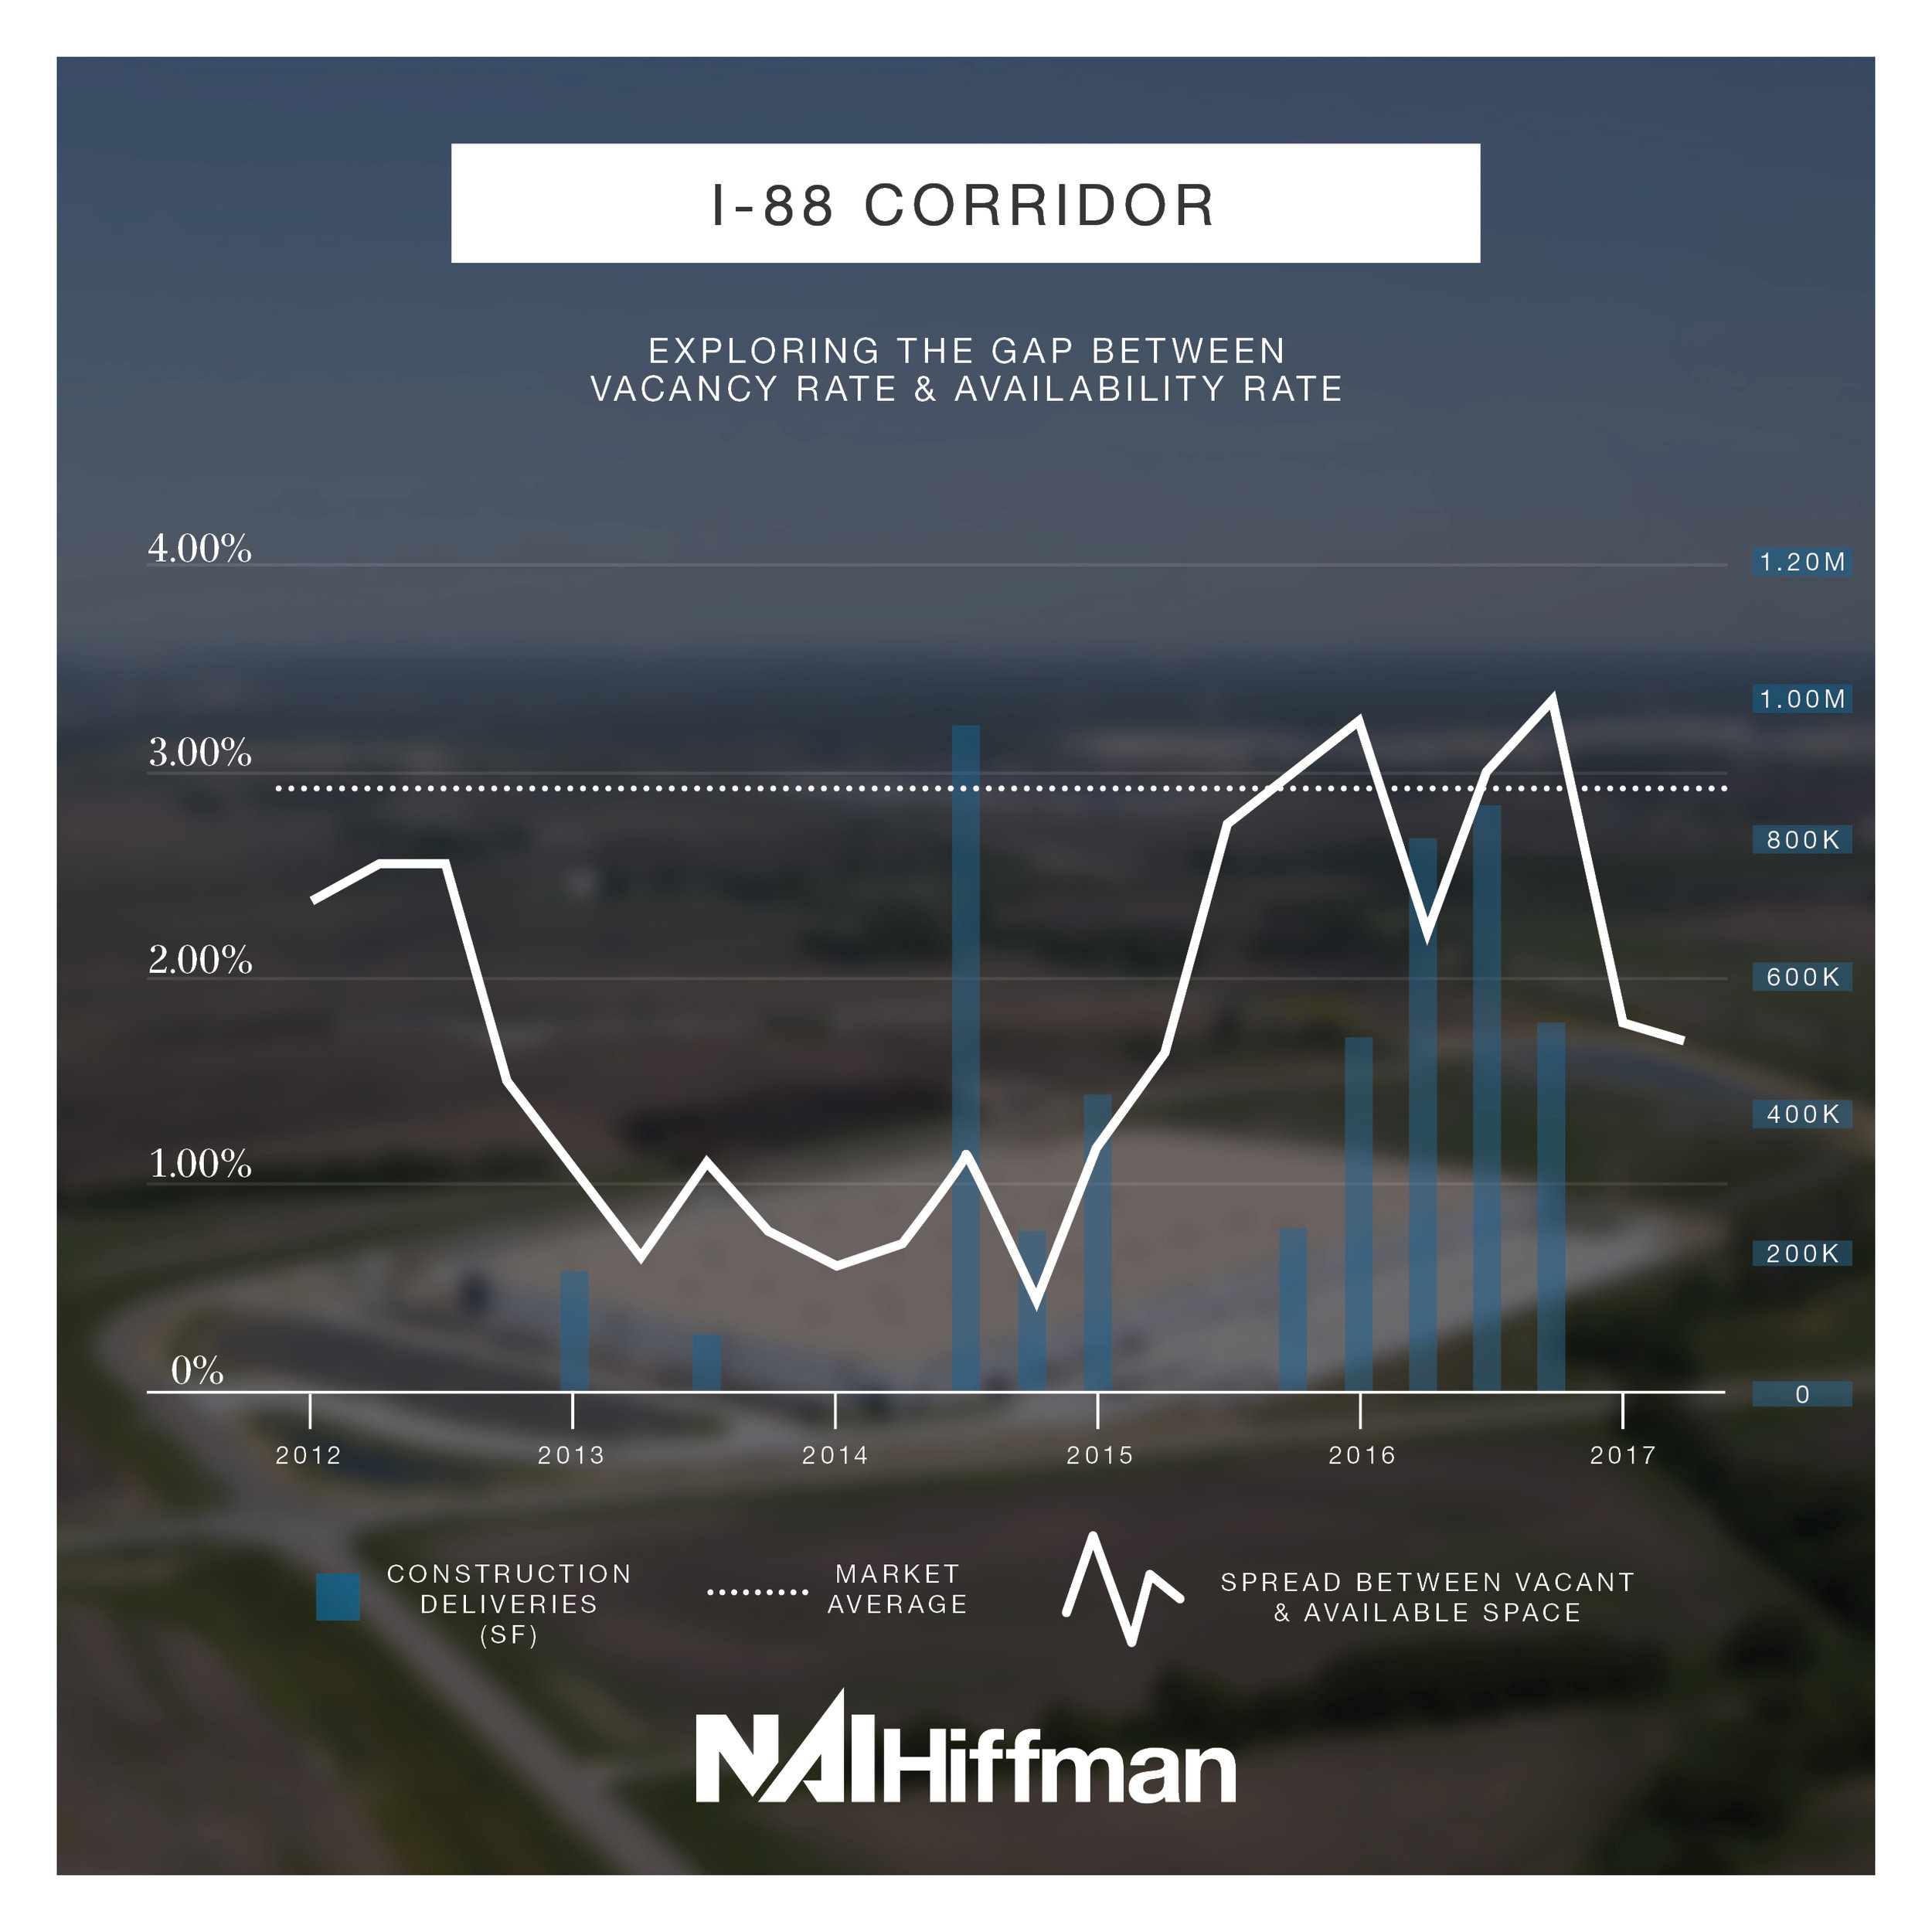   I-88 Corridor  - Historically the I-88 Corridor has remained below the market average, but with new construction deliveries in 2016 it peaked above the market average as it took a couple of quarters for leasing activity to catch up. With no new deliveries in 2017, the spread is now trending downwards again. 